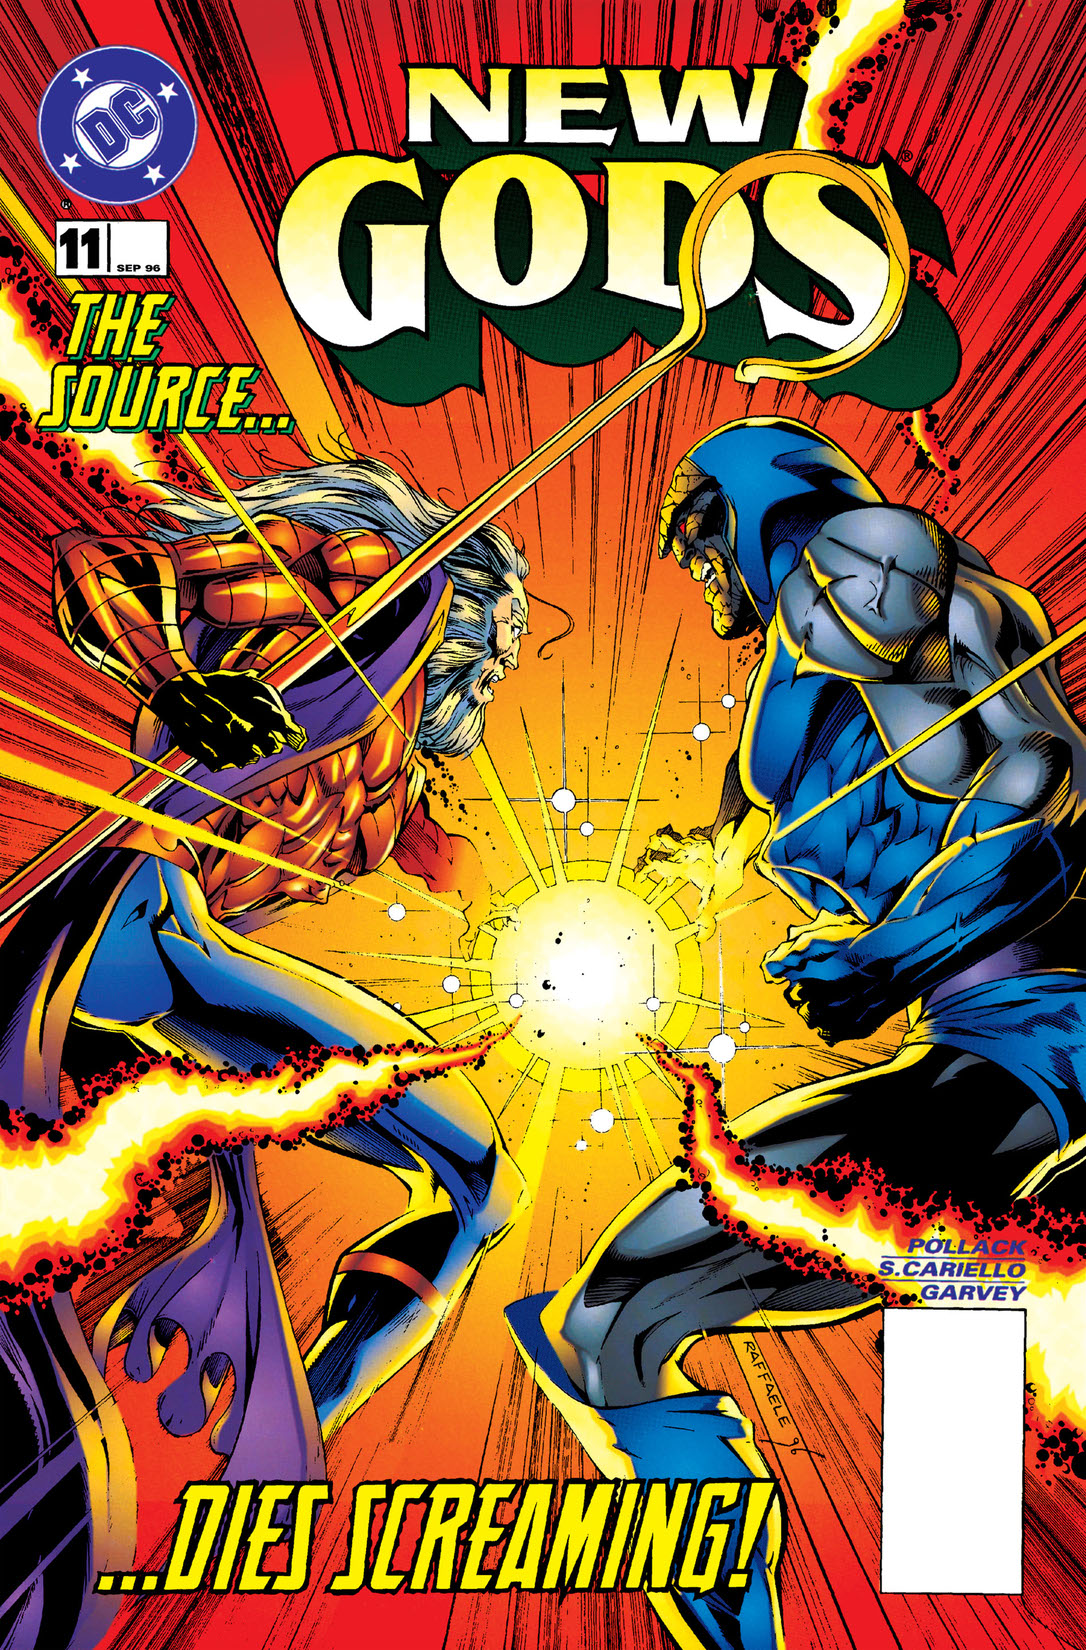 New Gods (1995-) #11 preview images